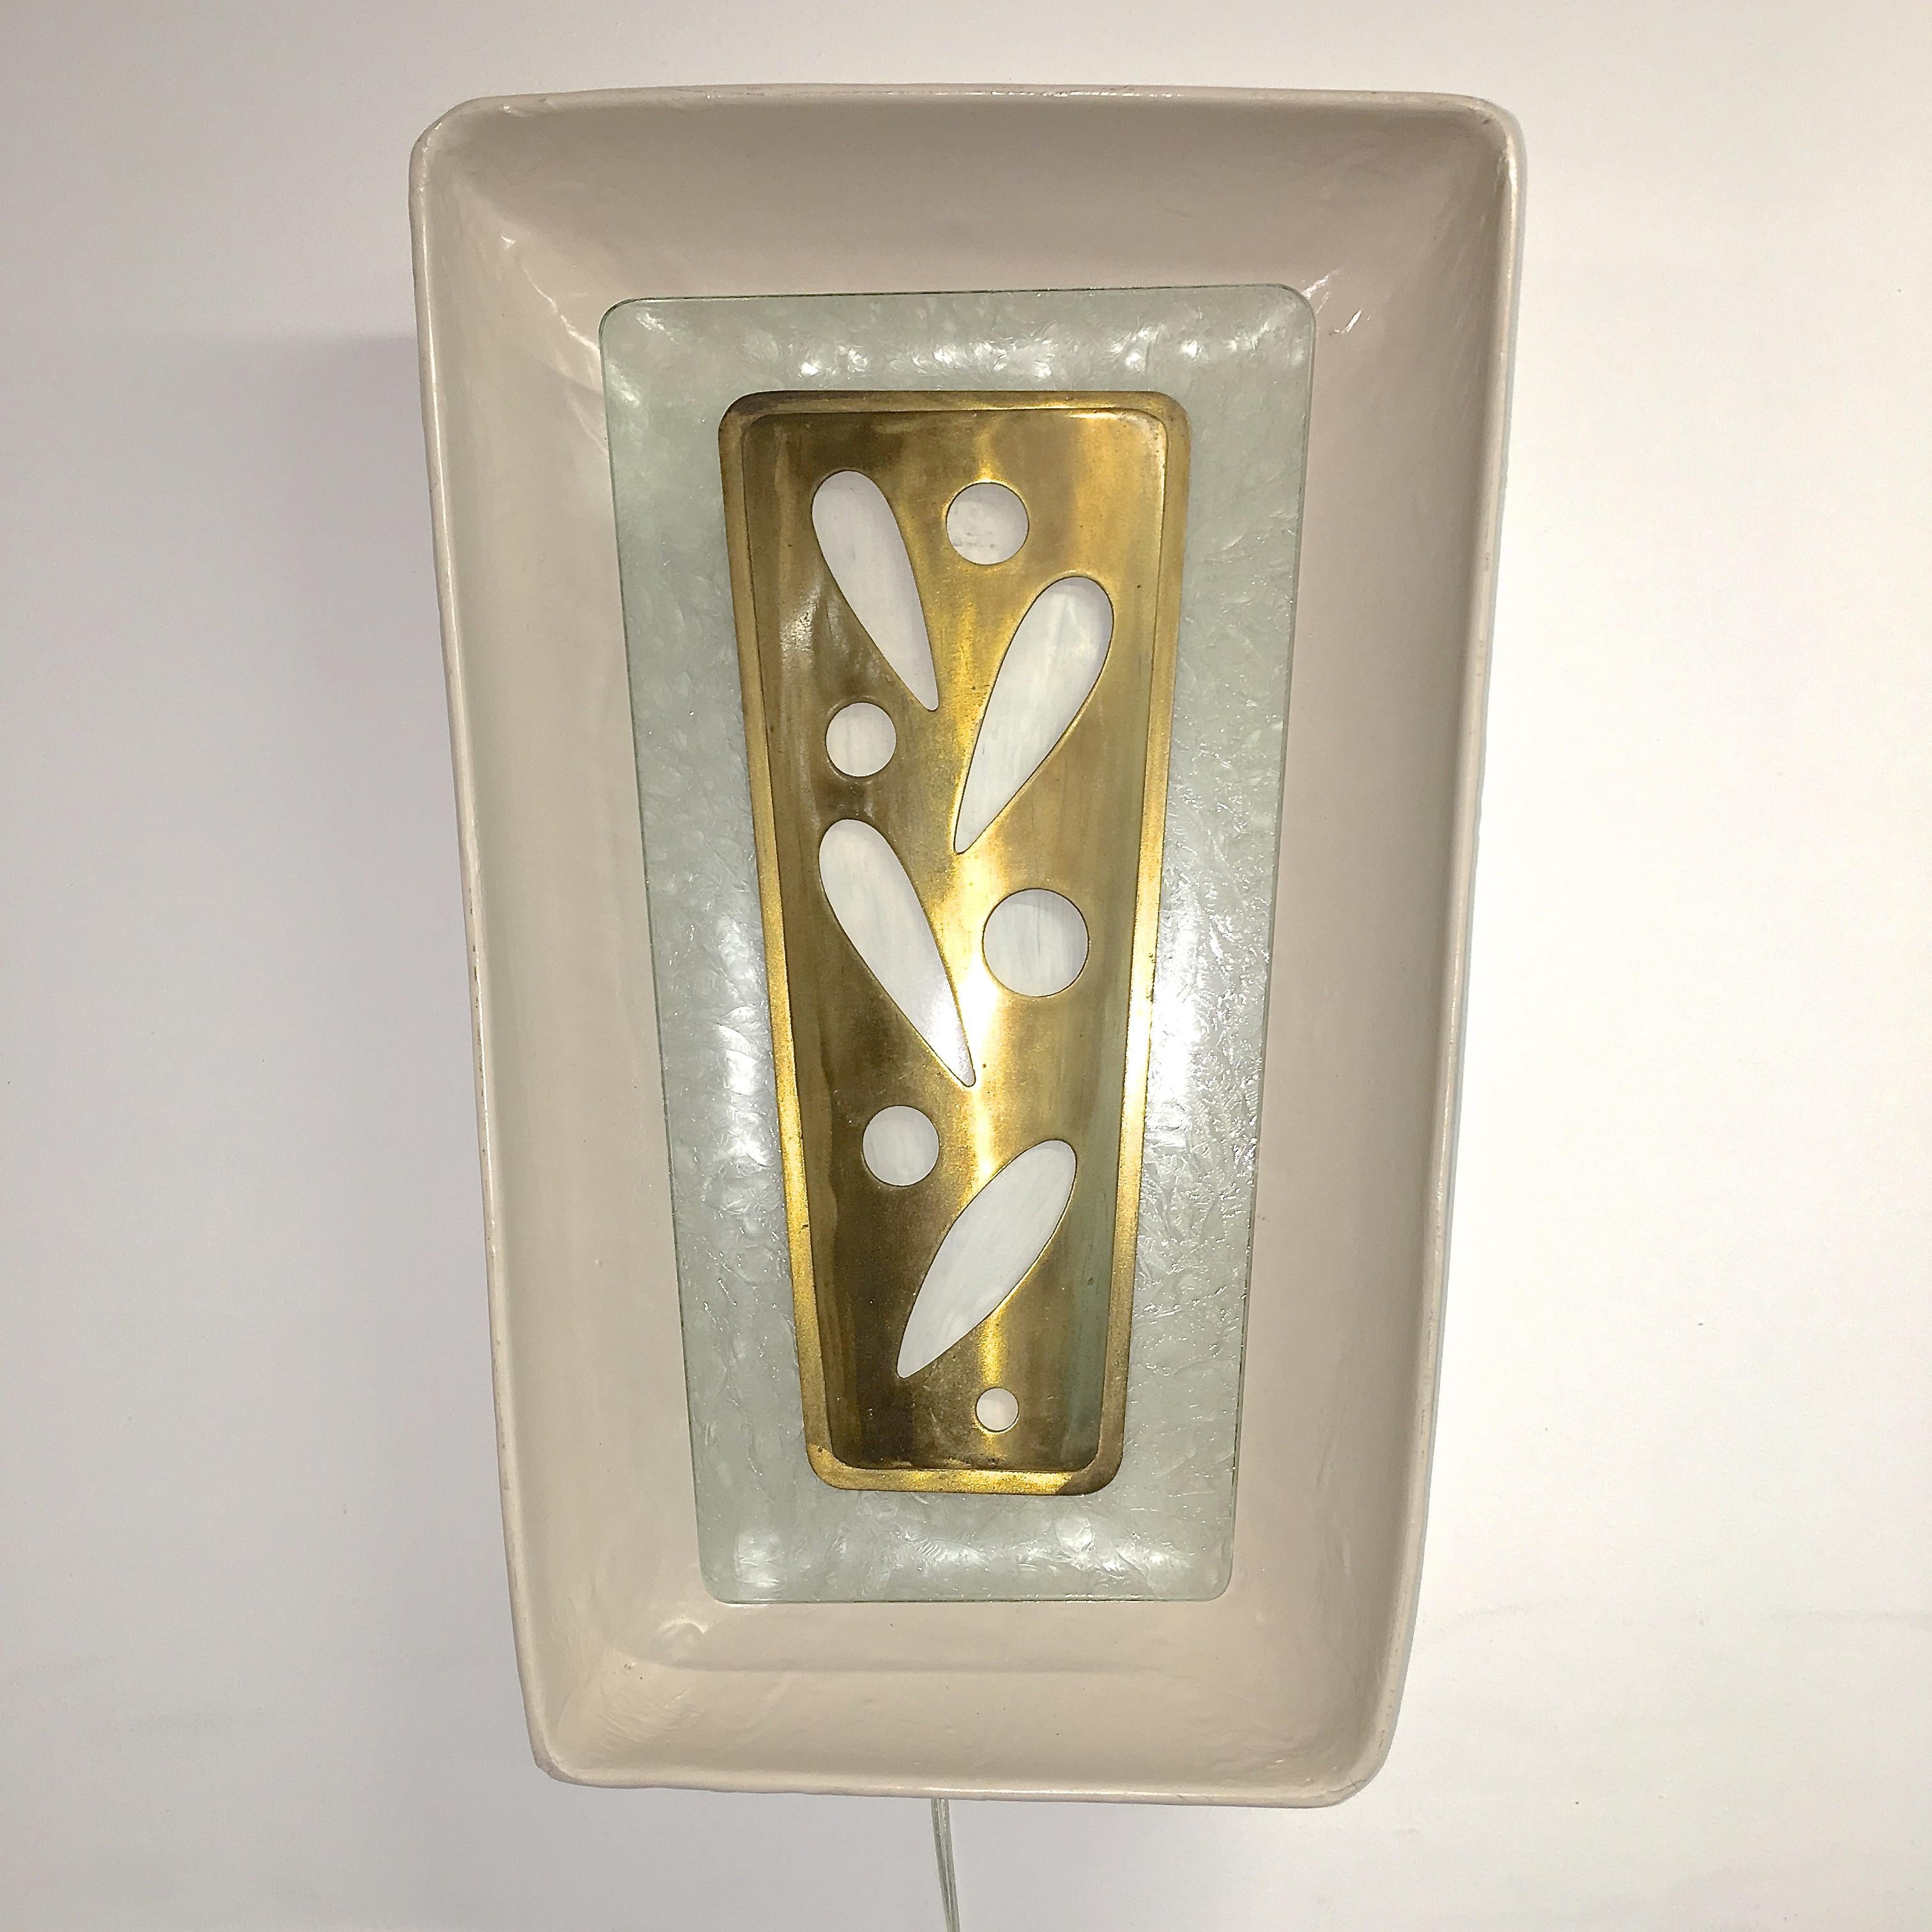 Gio Ponti Wall Sconce from the m/s Augustus Italian Ocean Liner 1951 In Fair Condition For Sale In Hanover, MA